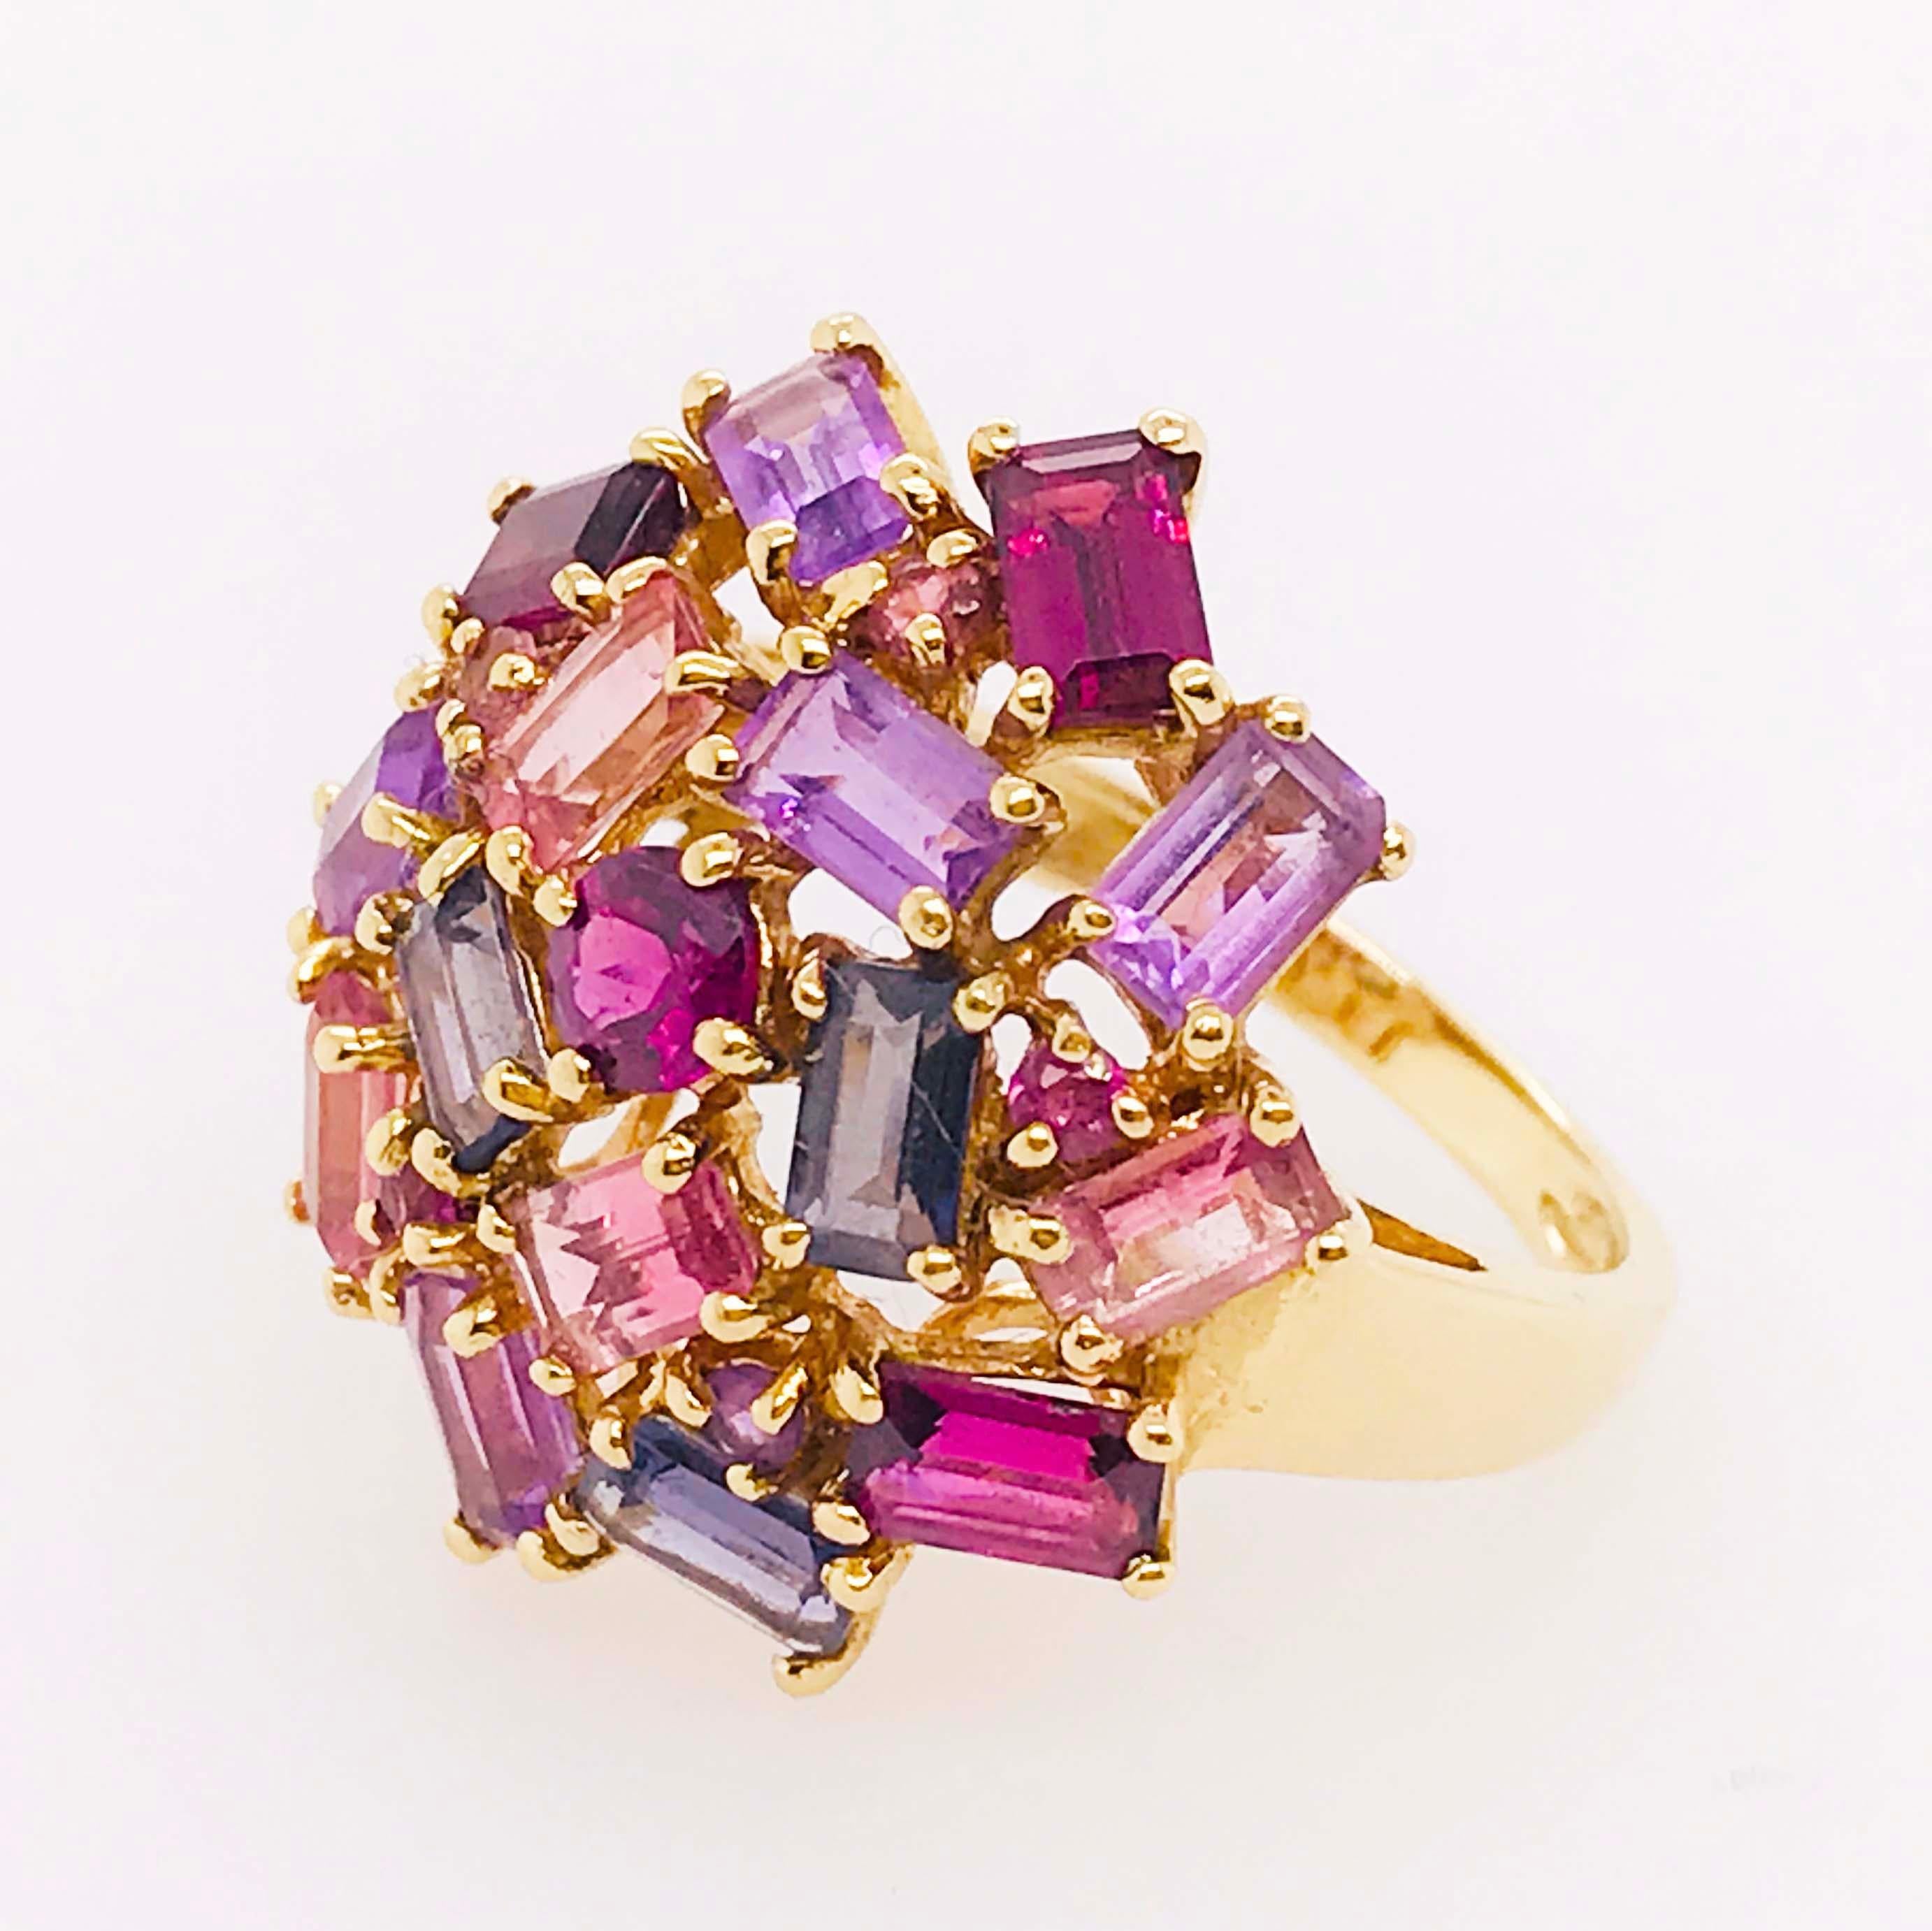 Baguette Cut Amethyst, Garnet and Tourmaline Cluster Fashion Cocktail Ring in 14k Yellow Gold